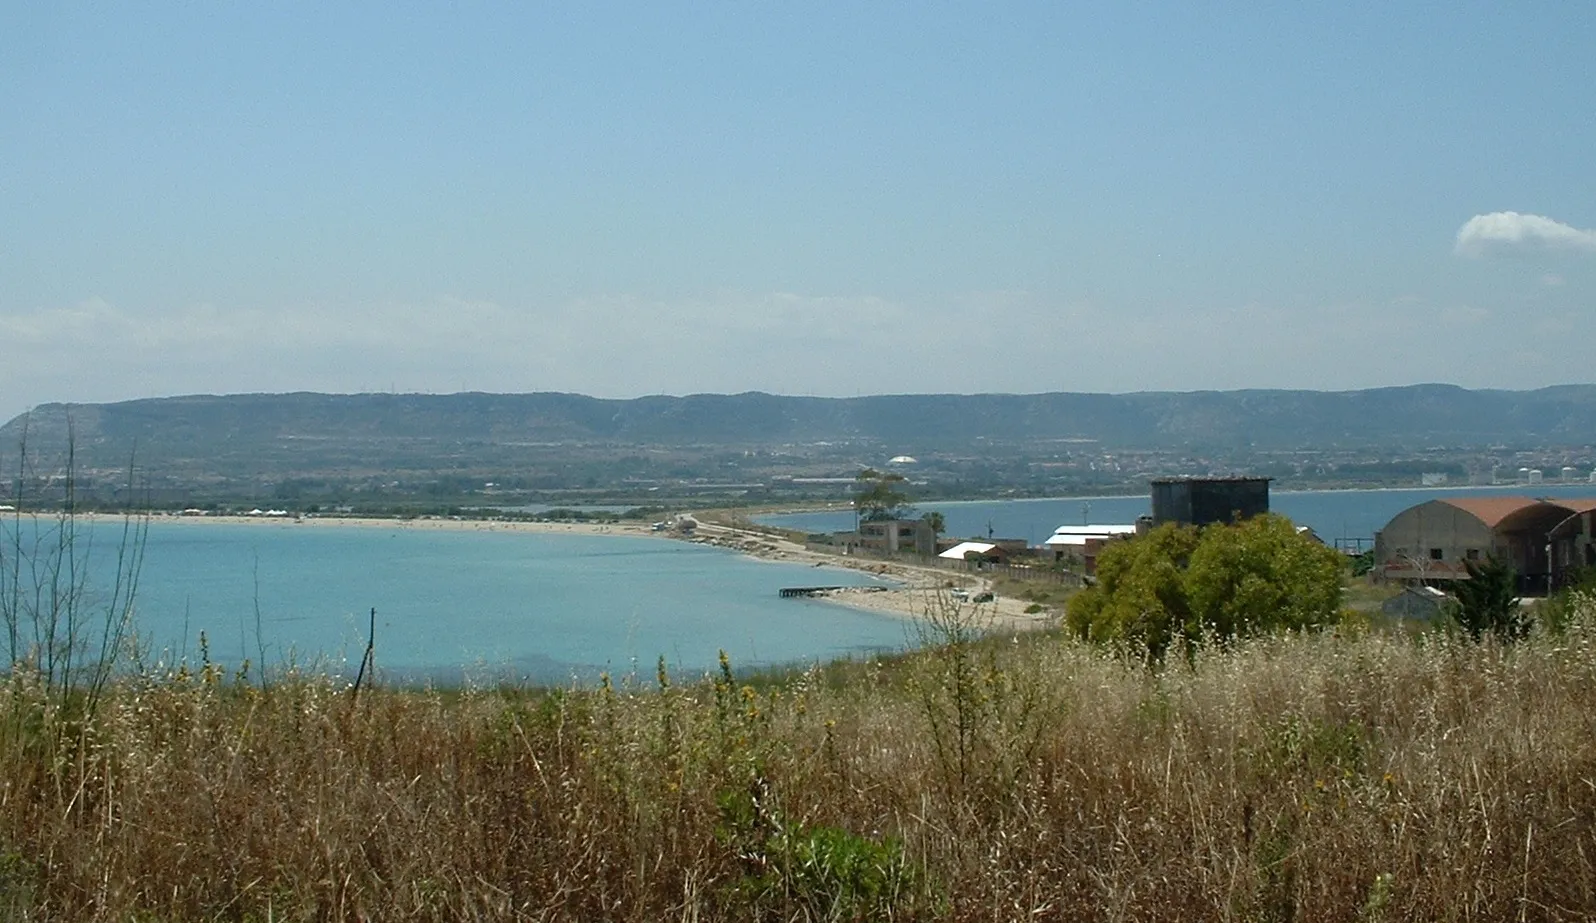 Photo showing: View of isthmus connecting the Magnisi Paeninsula to Marina di Priolo, Priolo Gargallo and Climiti mounts from Magnisi paeninsula, in Sicily.